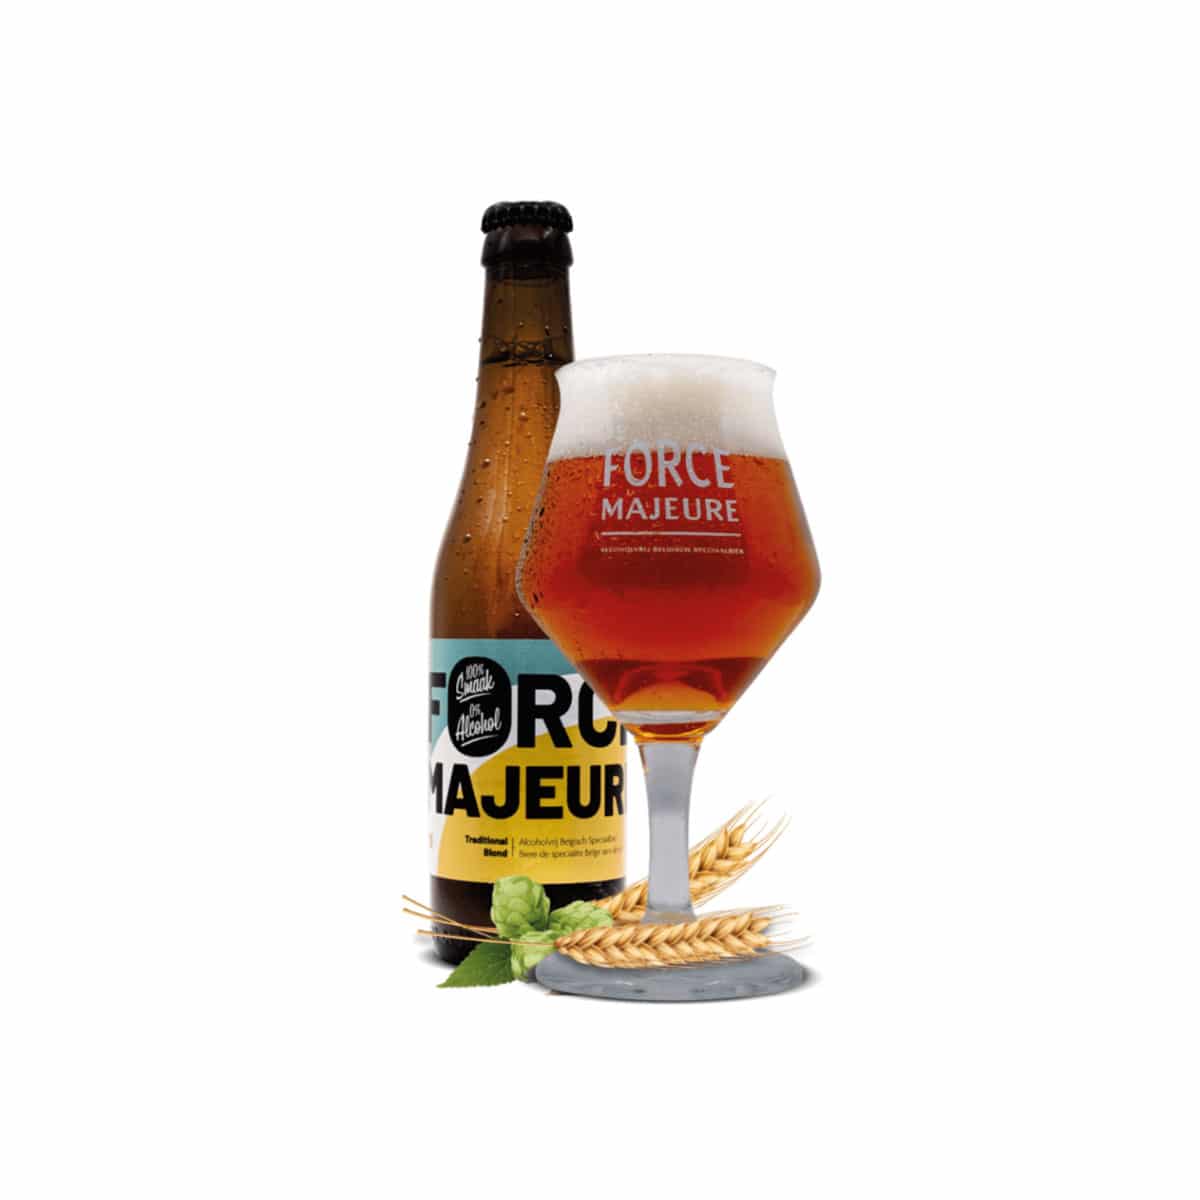 Force majeure blond no alcohol